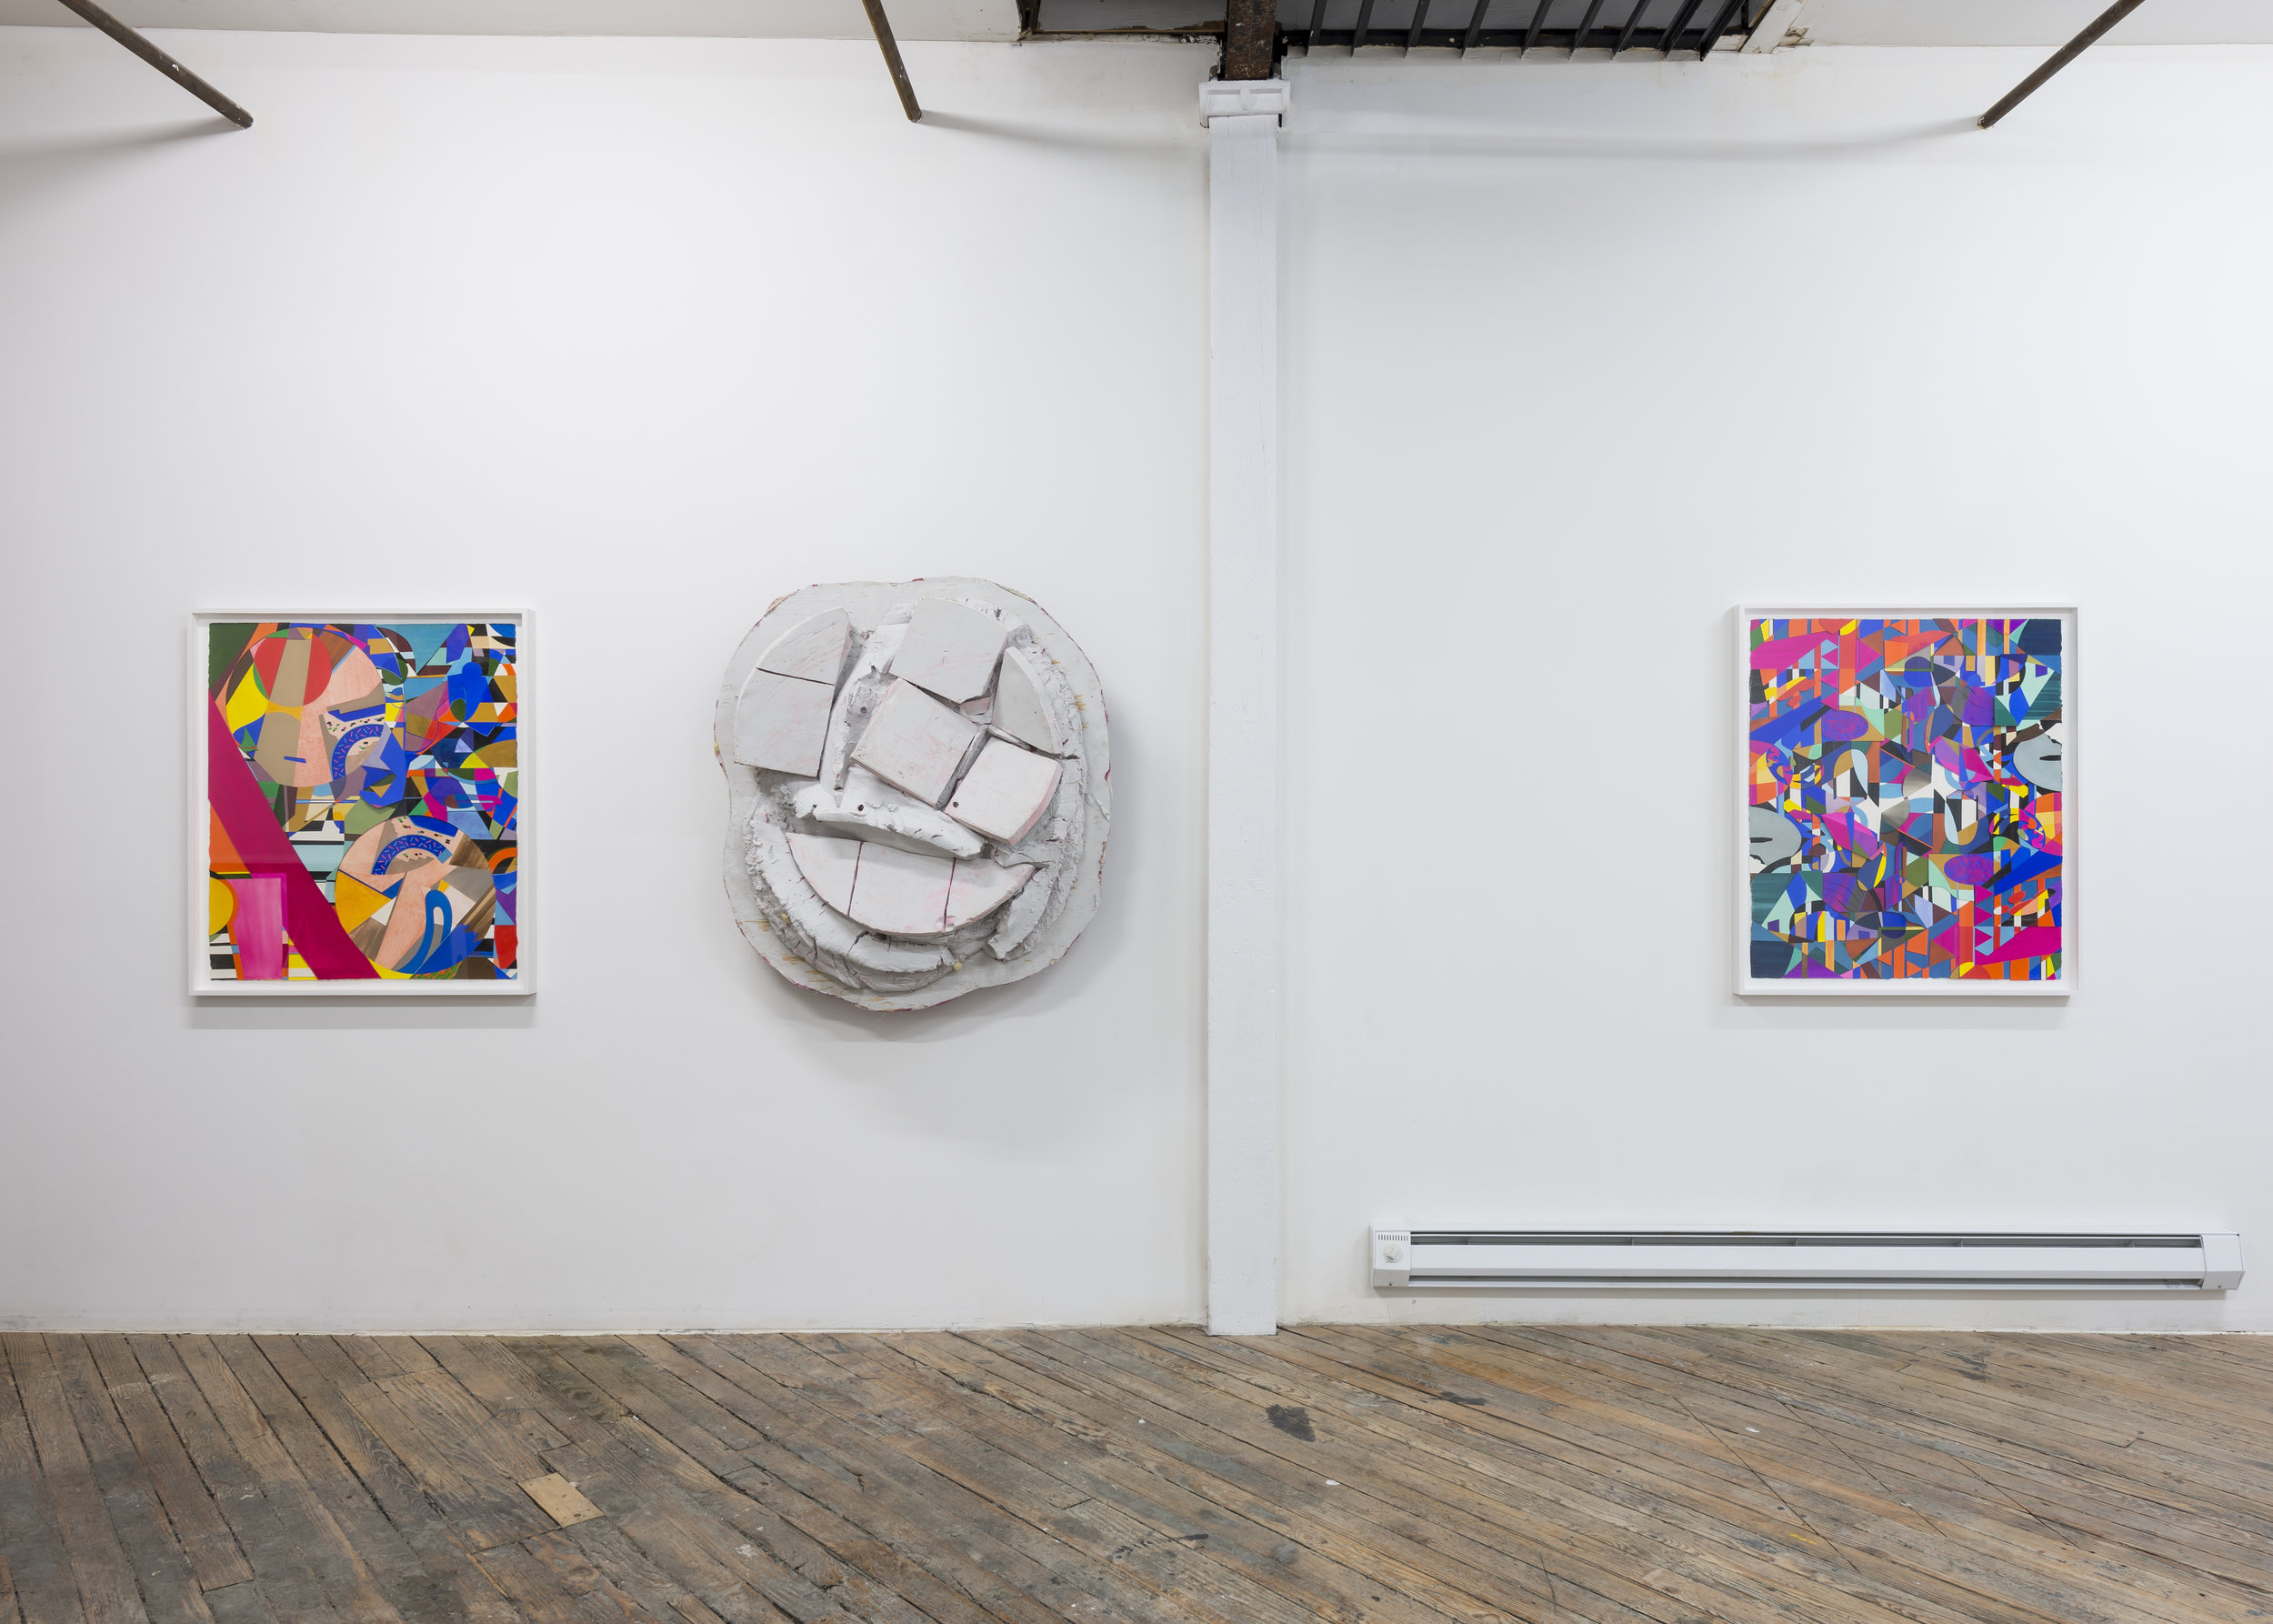  Installation view, “Ouroboros is Broken” (with Jerry Blackman), Hometown, Brooklyn, 2016 